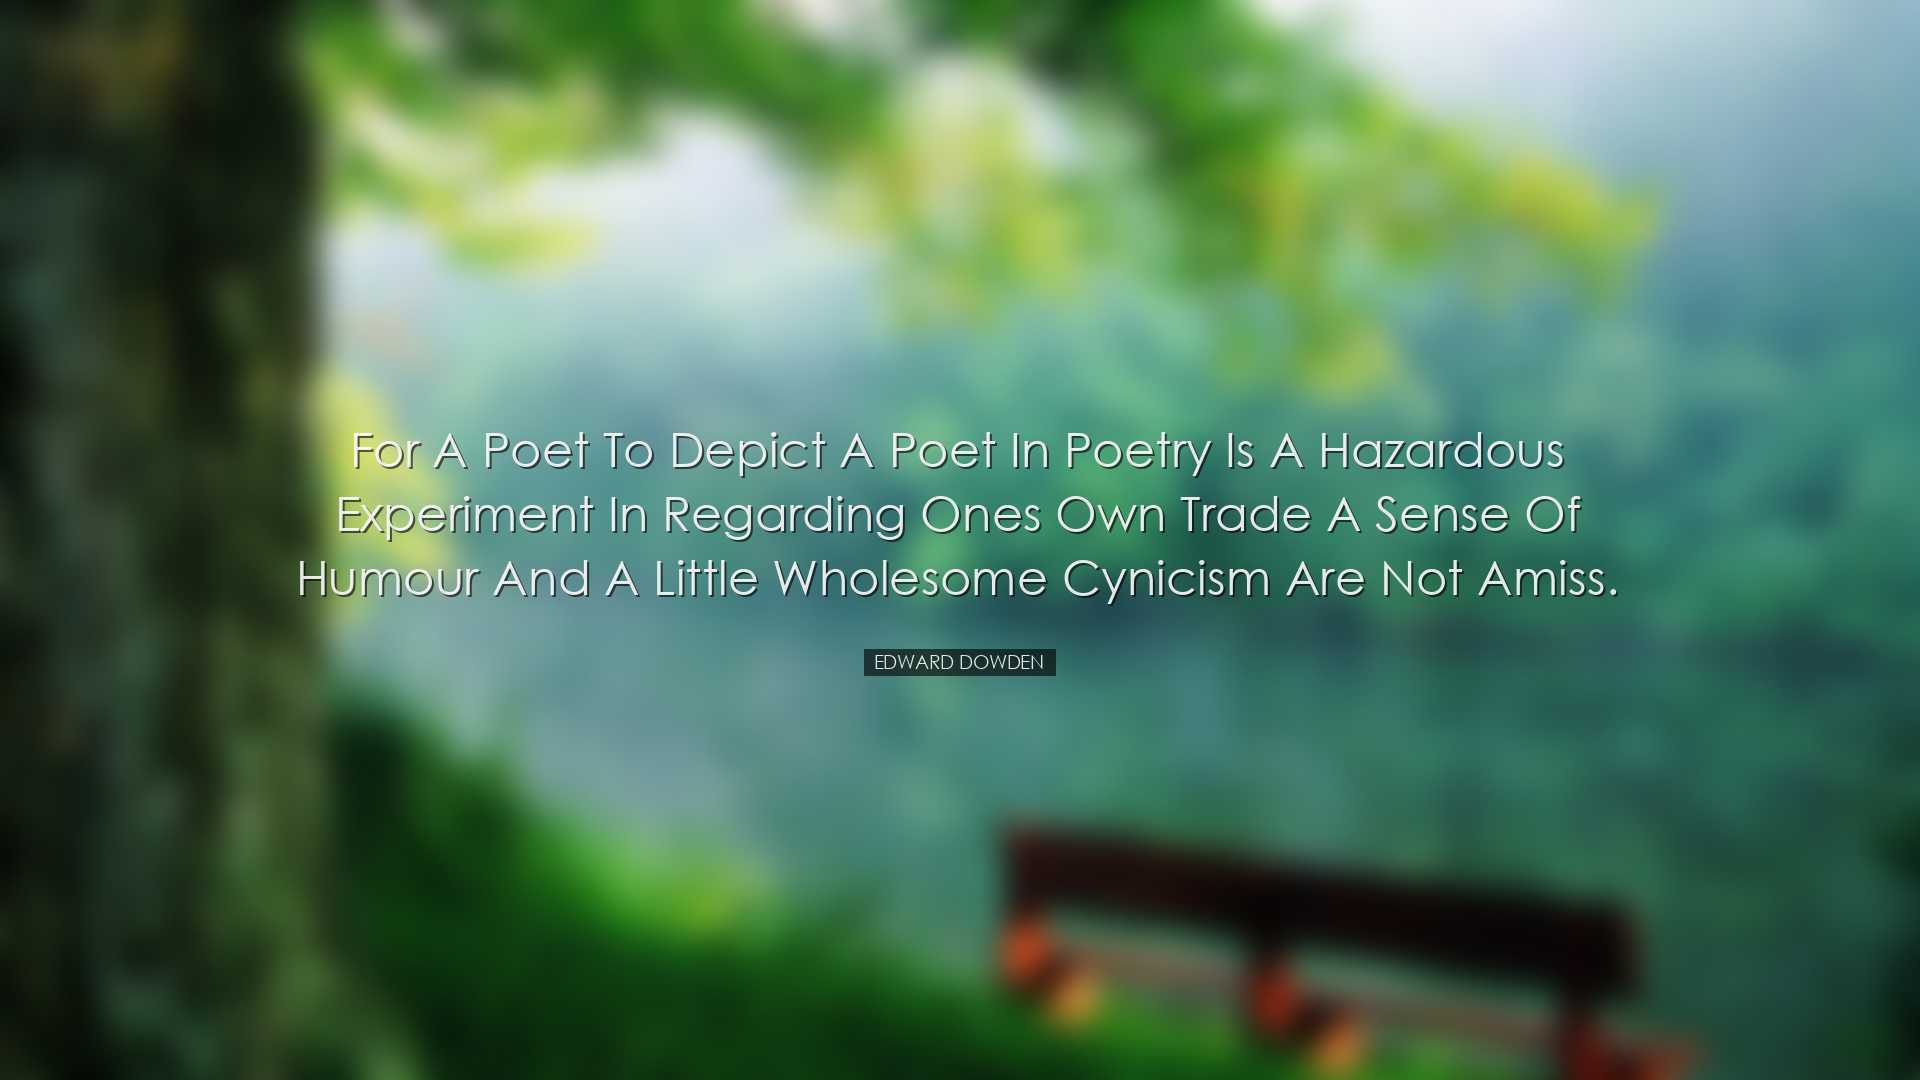 For a poet to depict a poet in poetry is a hazardous experiment in